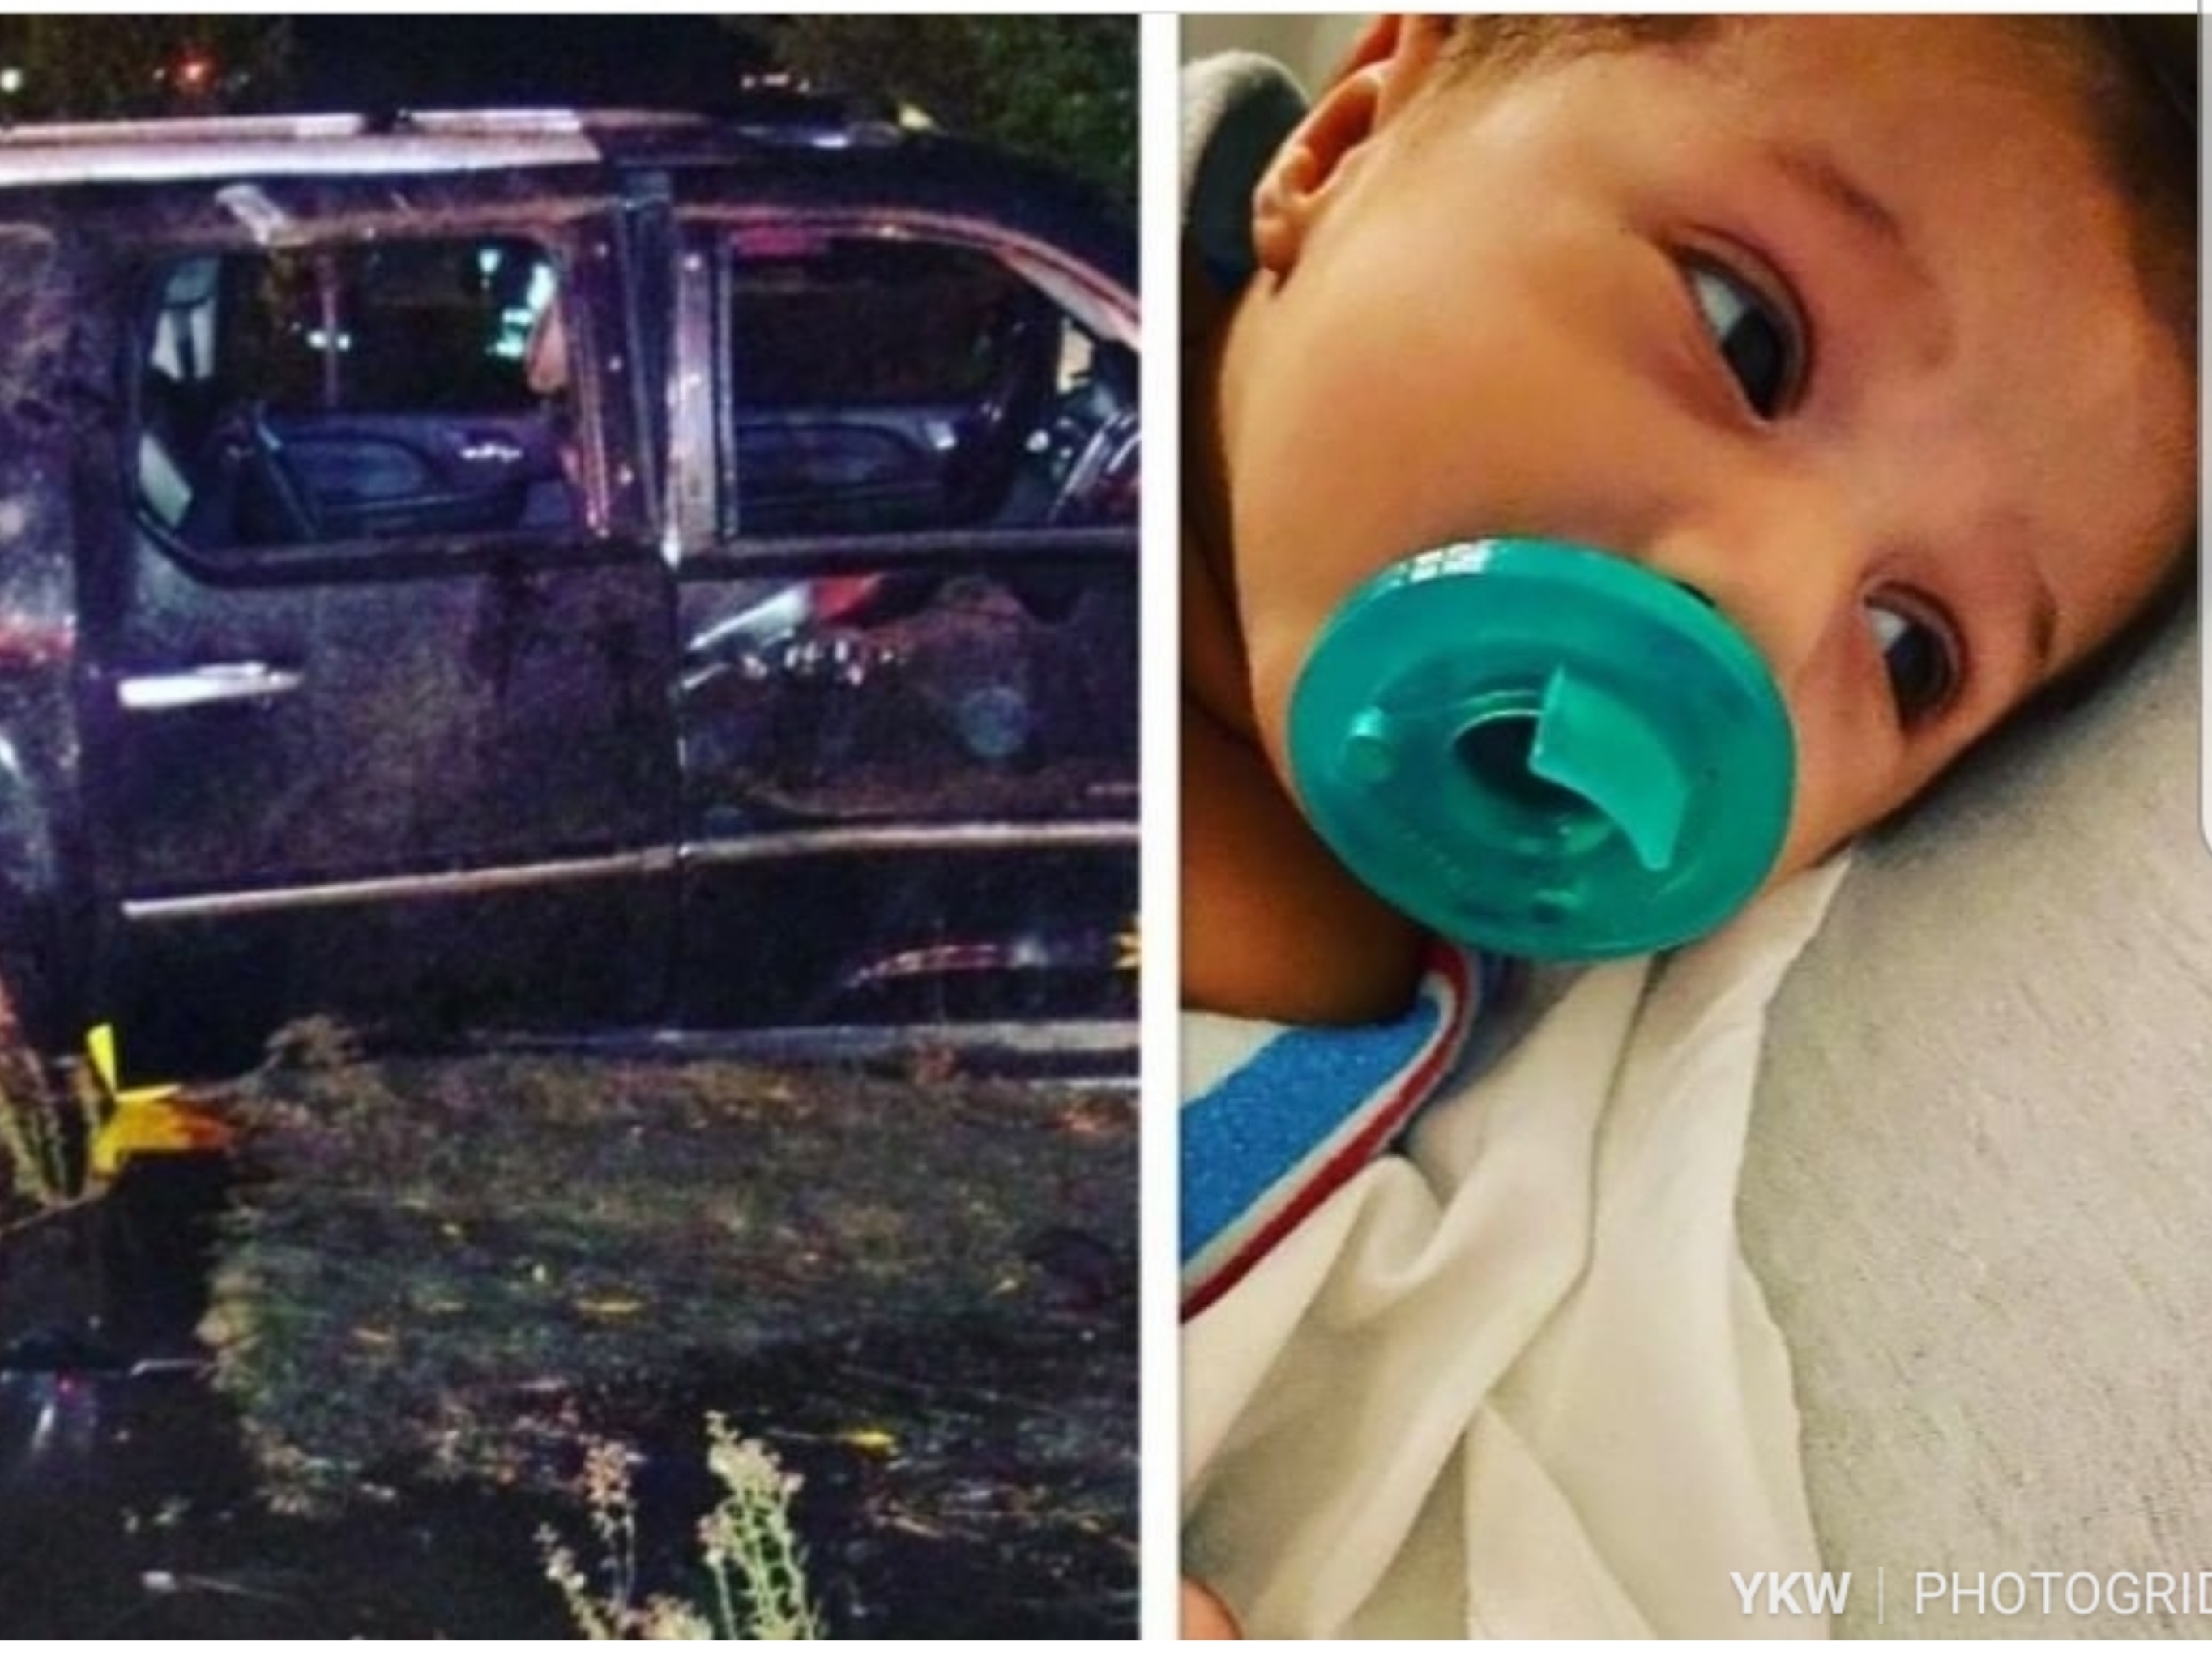 Newborn Baby Ejected From SUV In Crash Miraculously Survives Along With Family